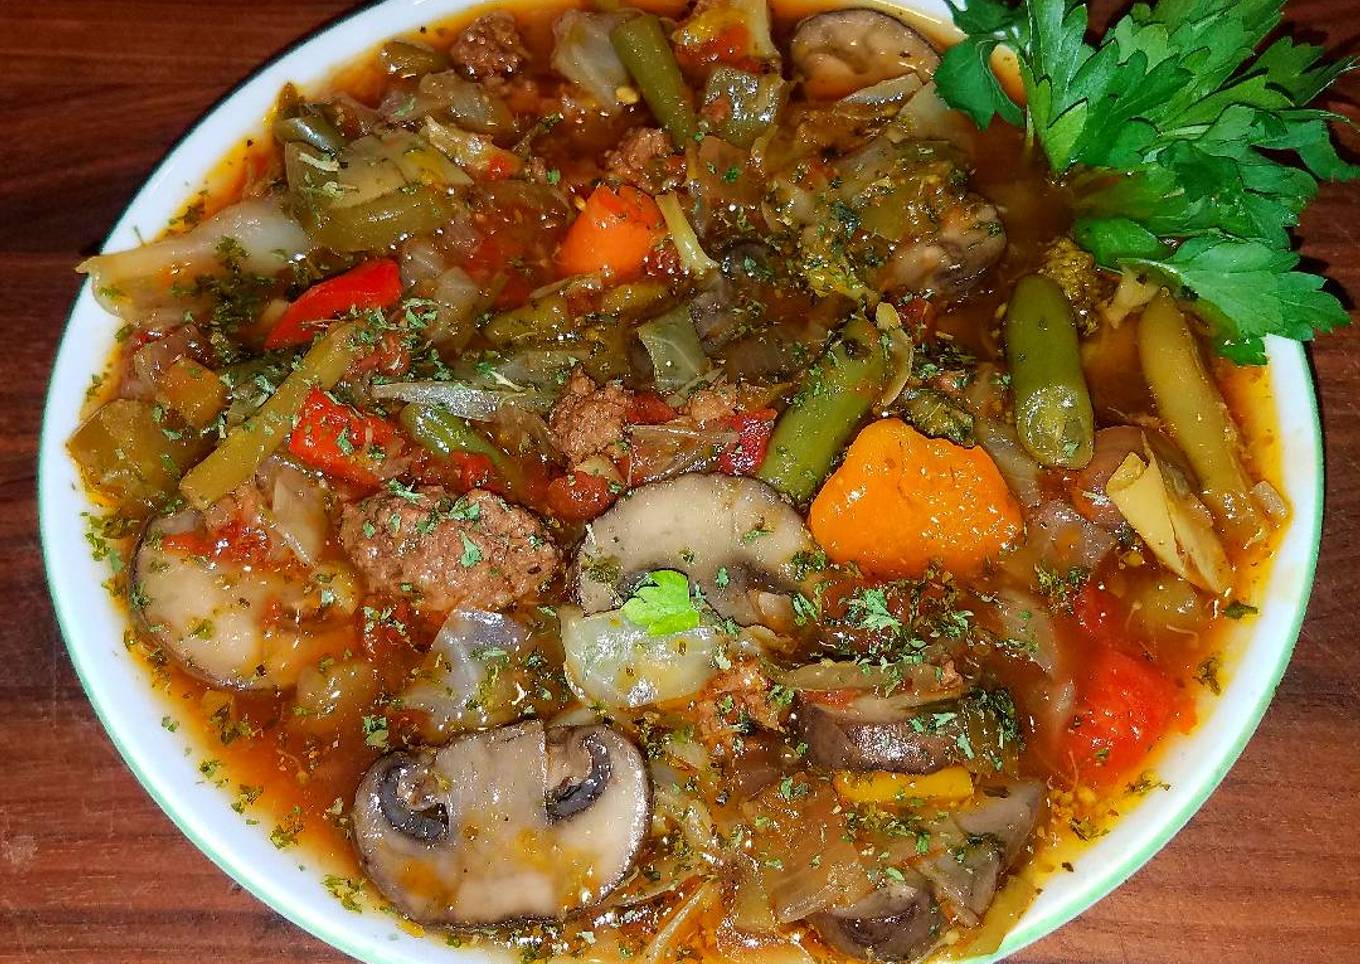 Mike's Low Carb/Calorie Vegetable Beef Soup